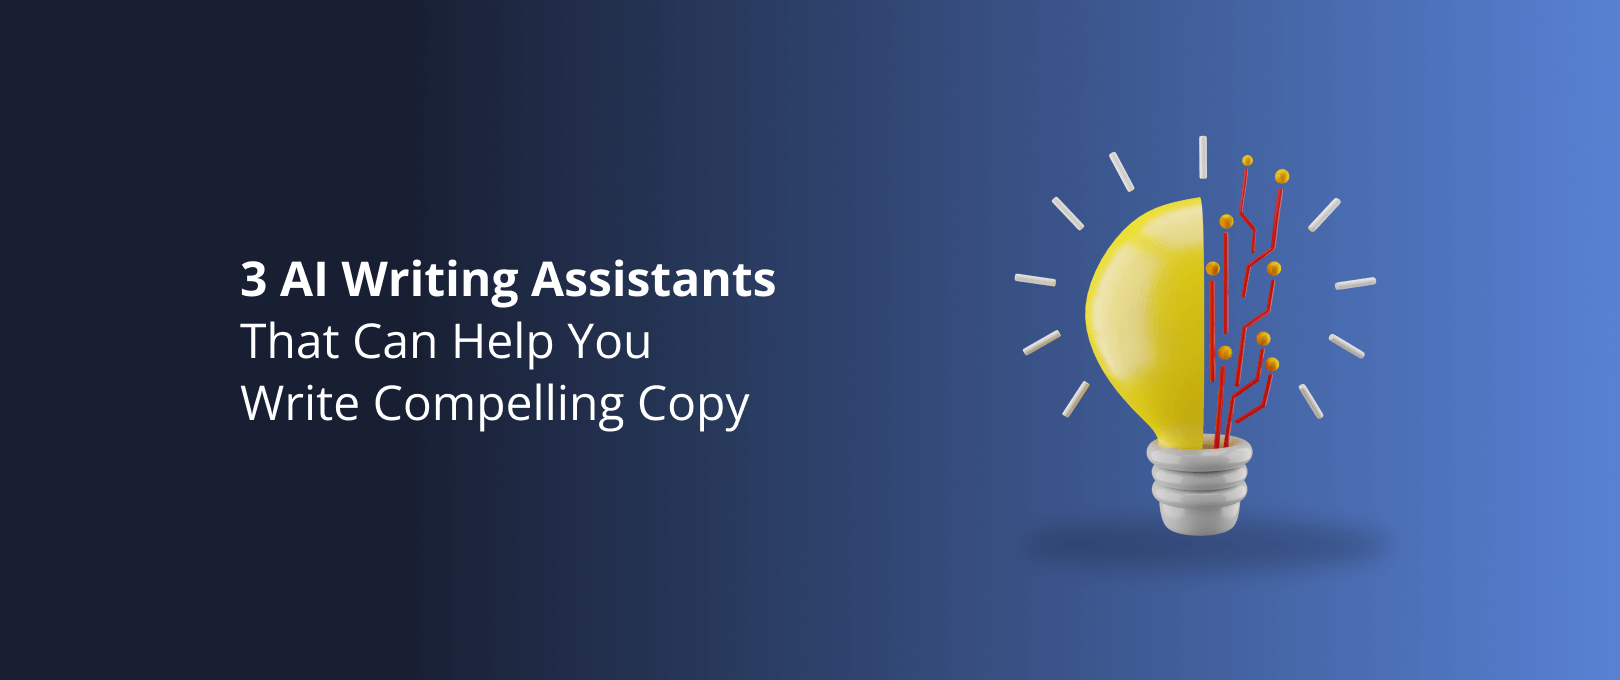 3 AI Writing Assistants That Can Help You Write Compelling Copy - DevriX